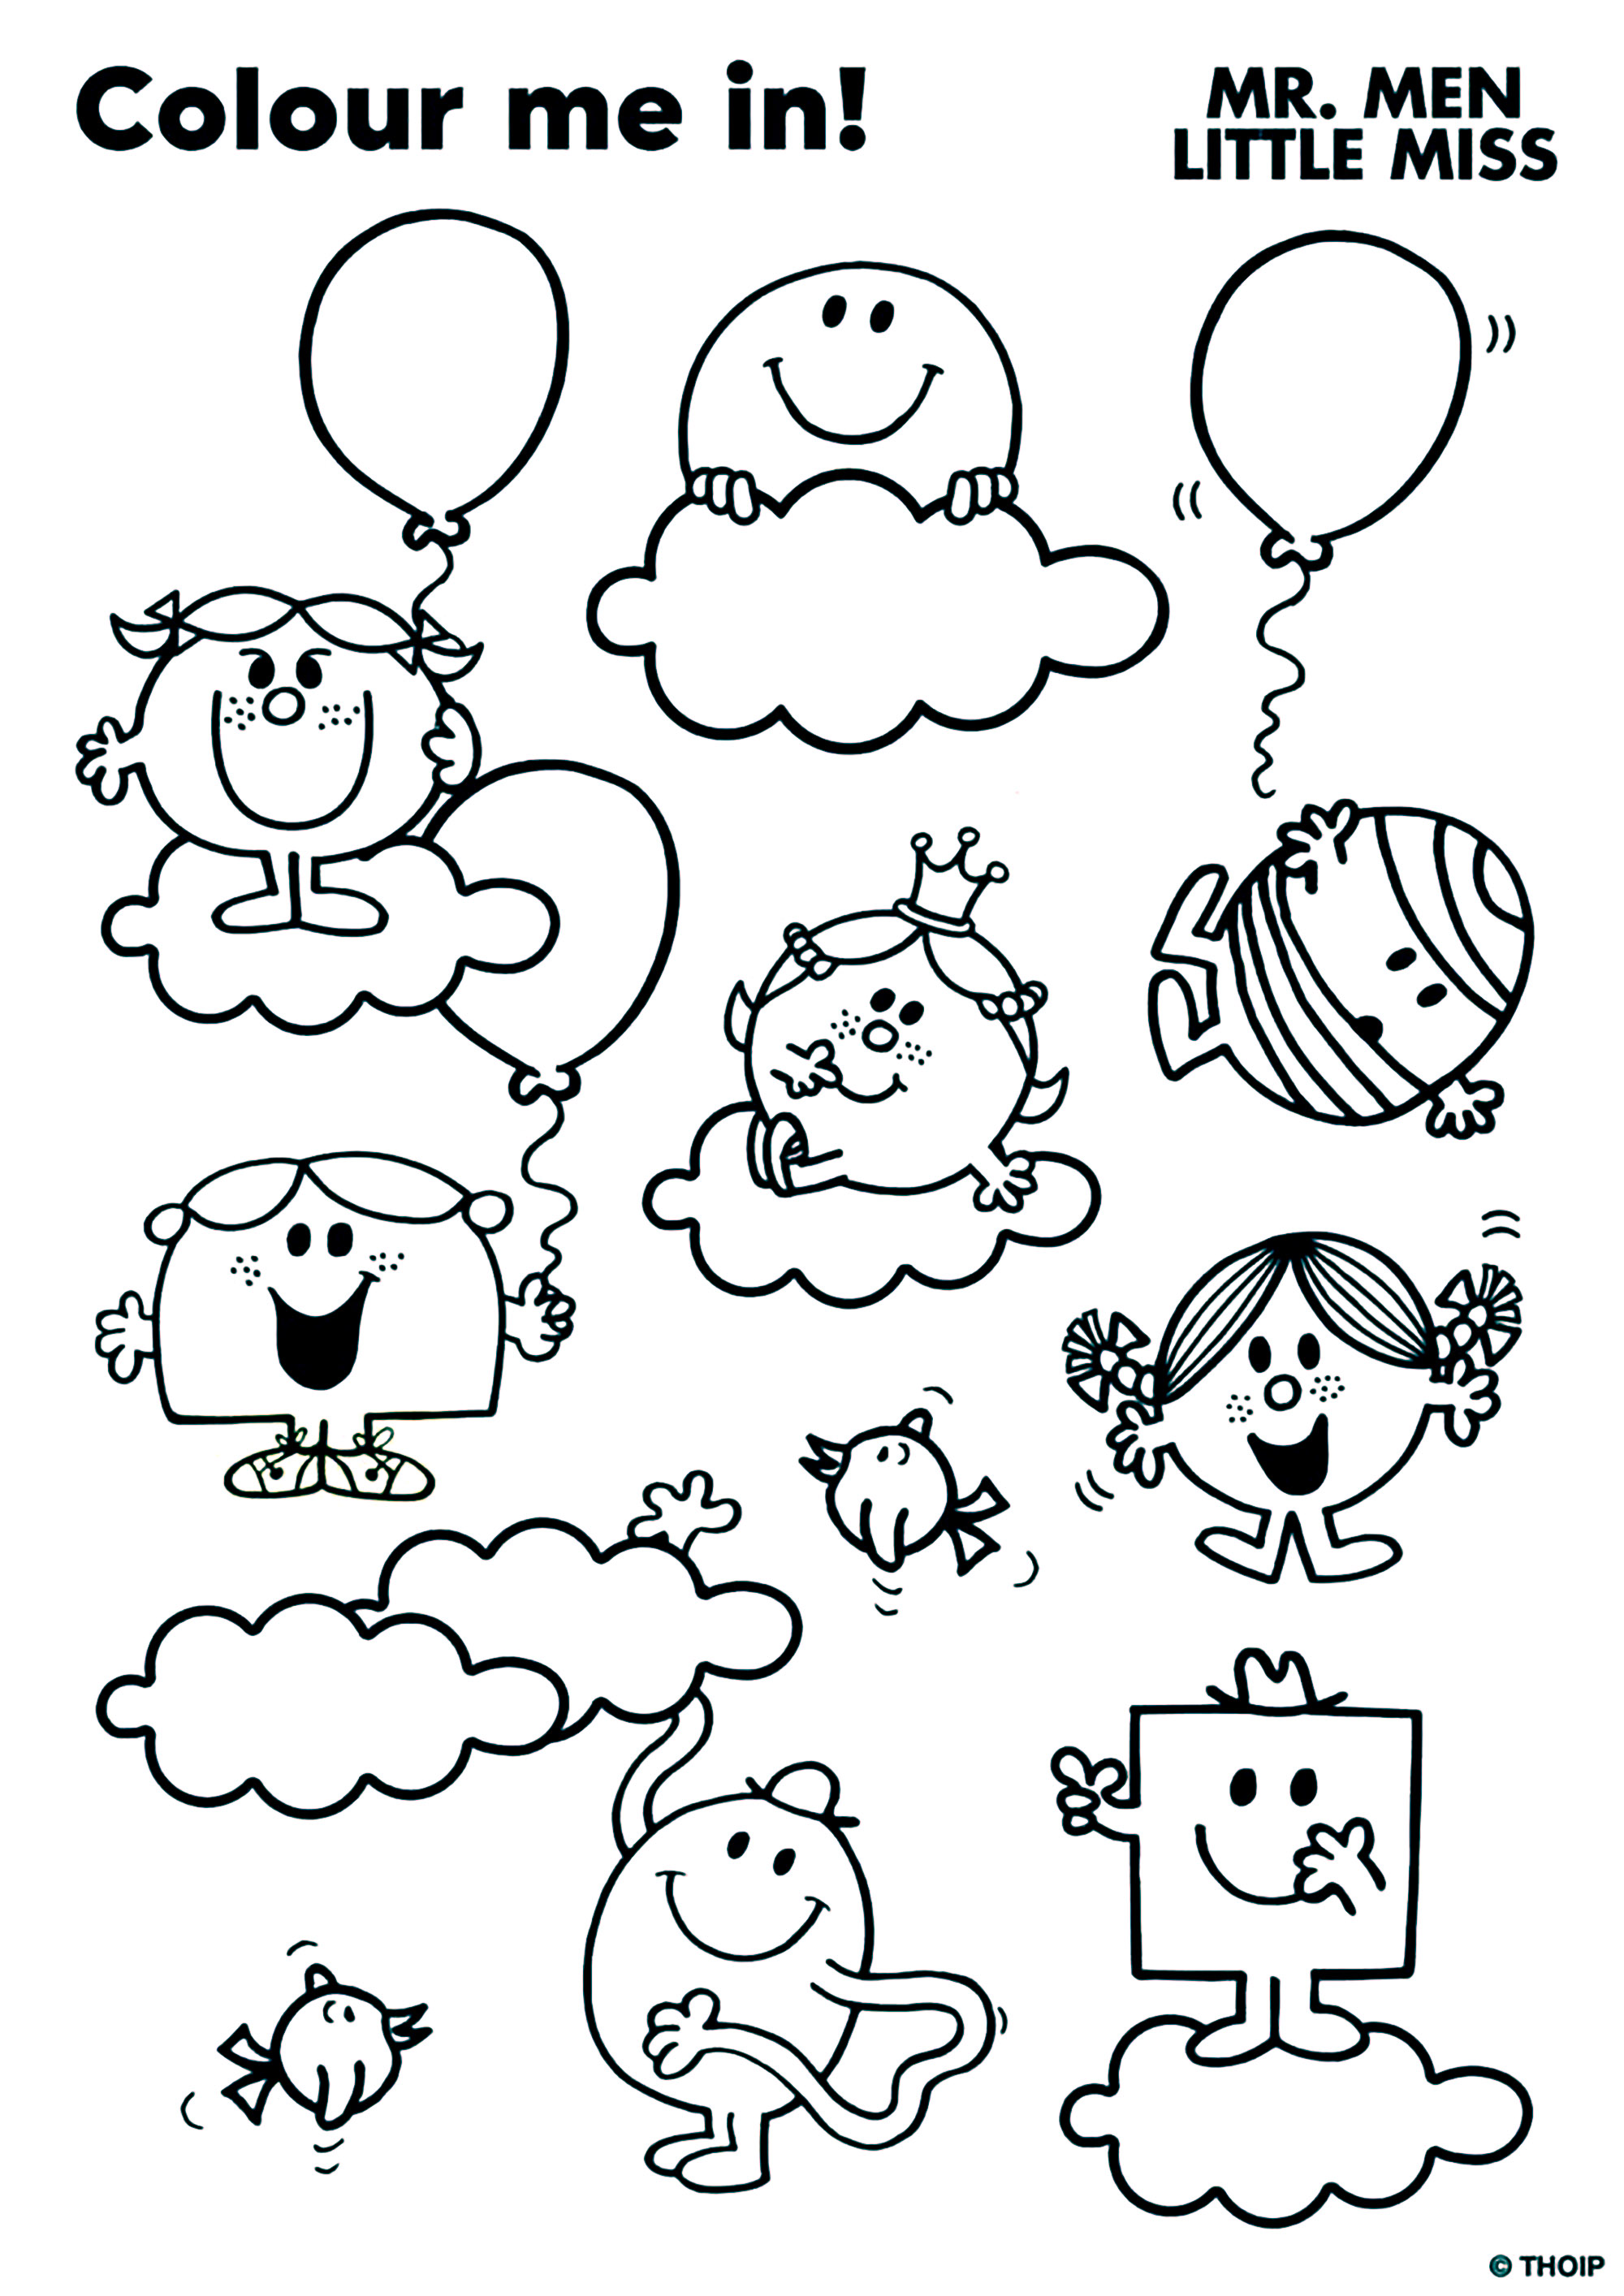 Mr. Men and Little Miss coloring page: in the sky. Color the various characters with their unique personalities